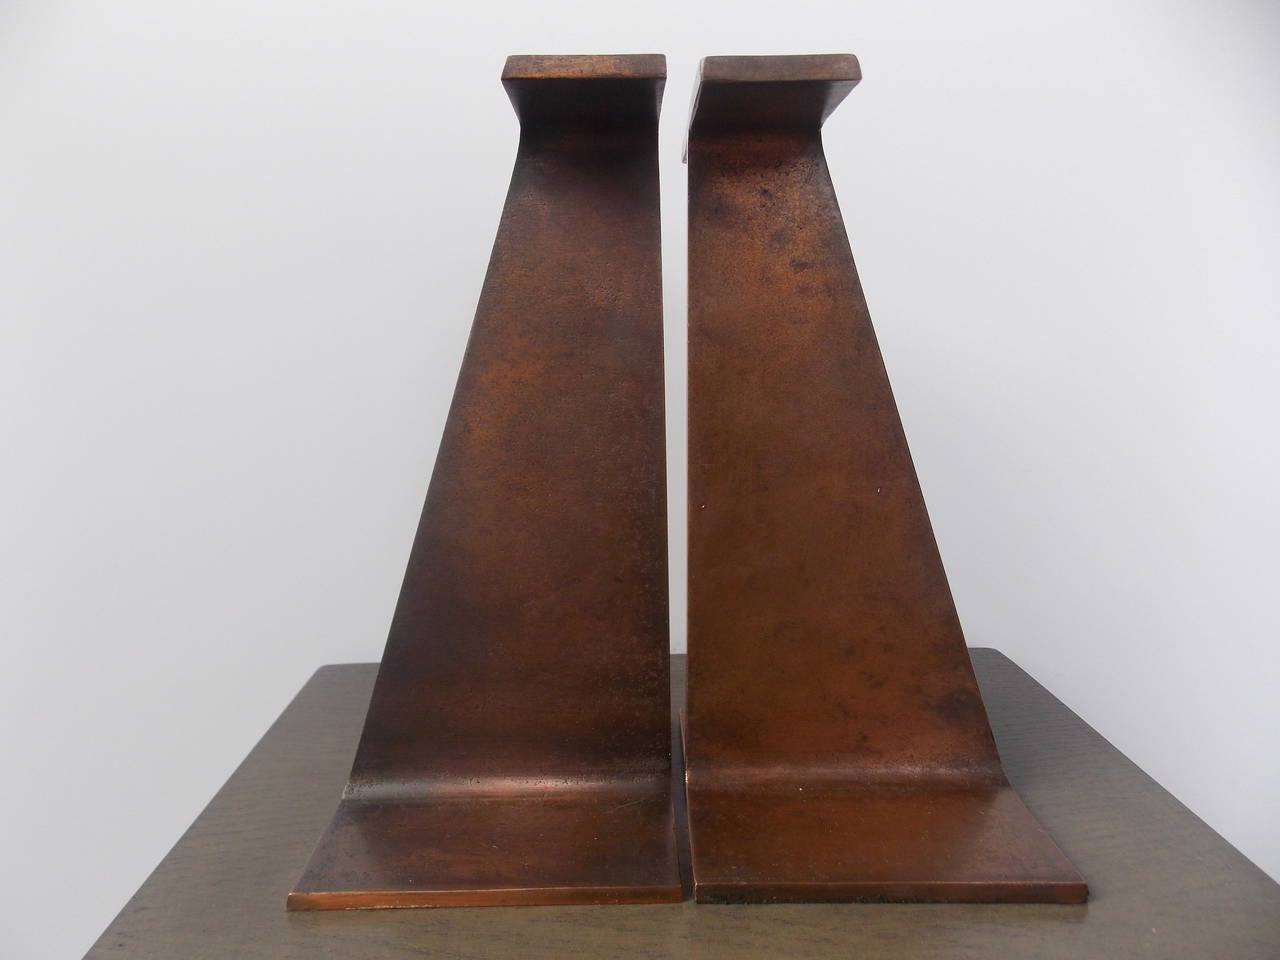 A nice pair or bookends that can be used individually as art objects.
Made of cast steel with bronze plating.